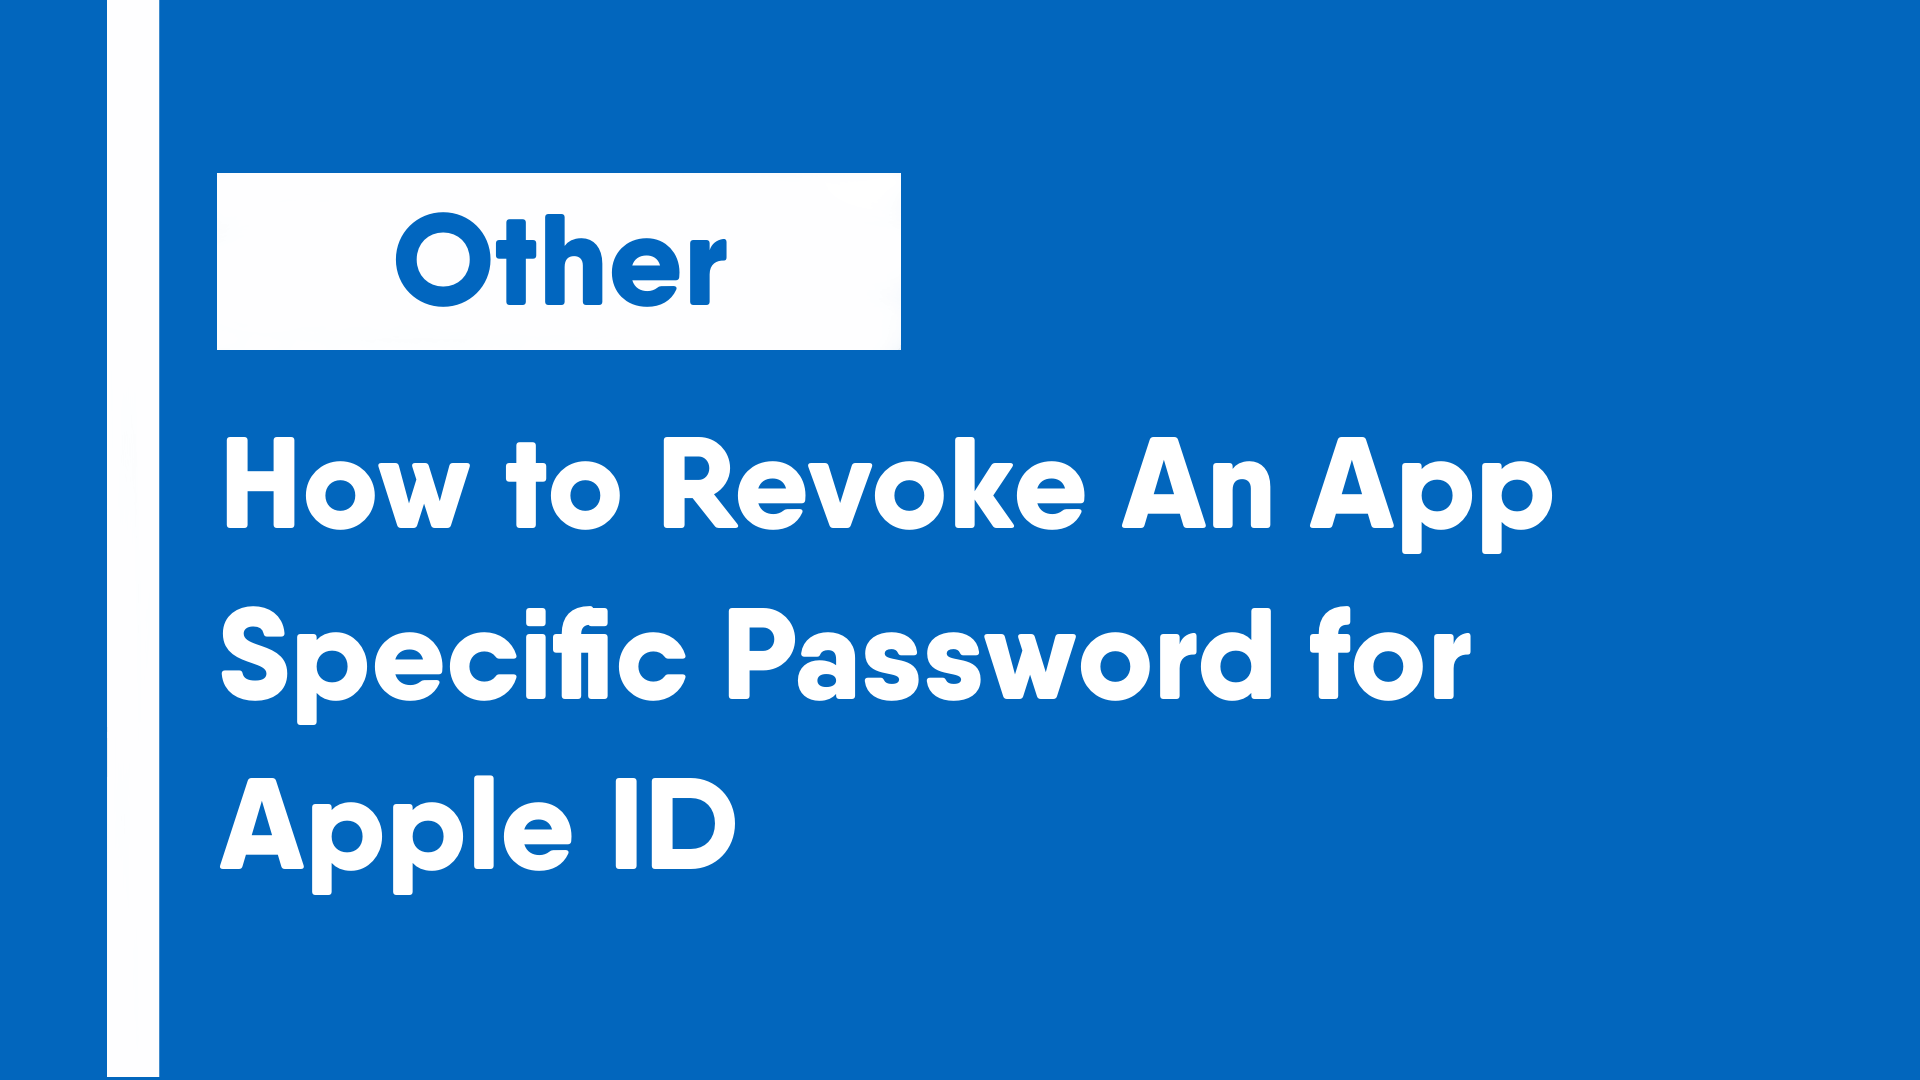 How to Revoke An App Specific Password for Apple ID